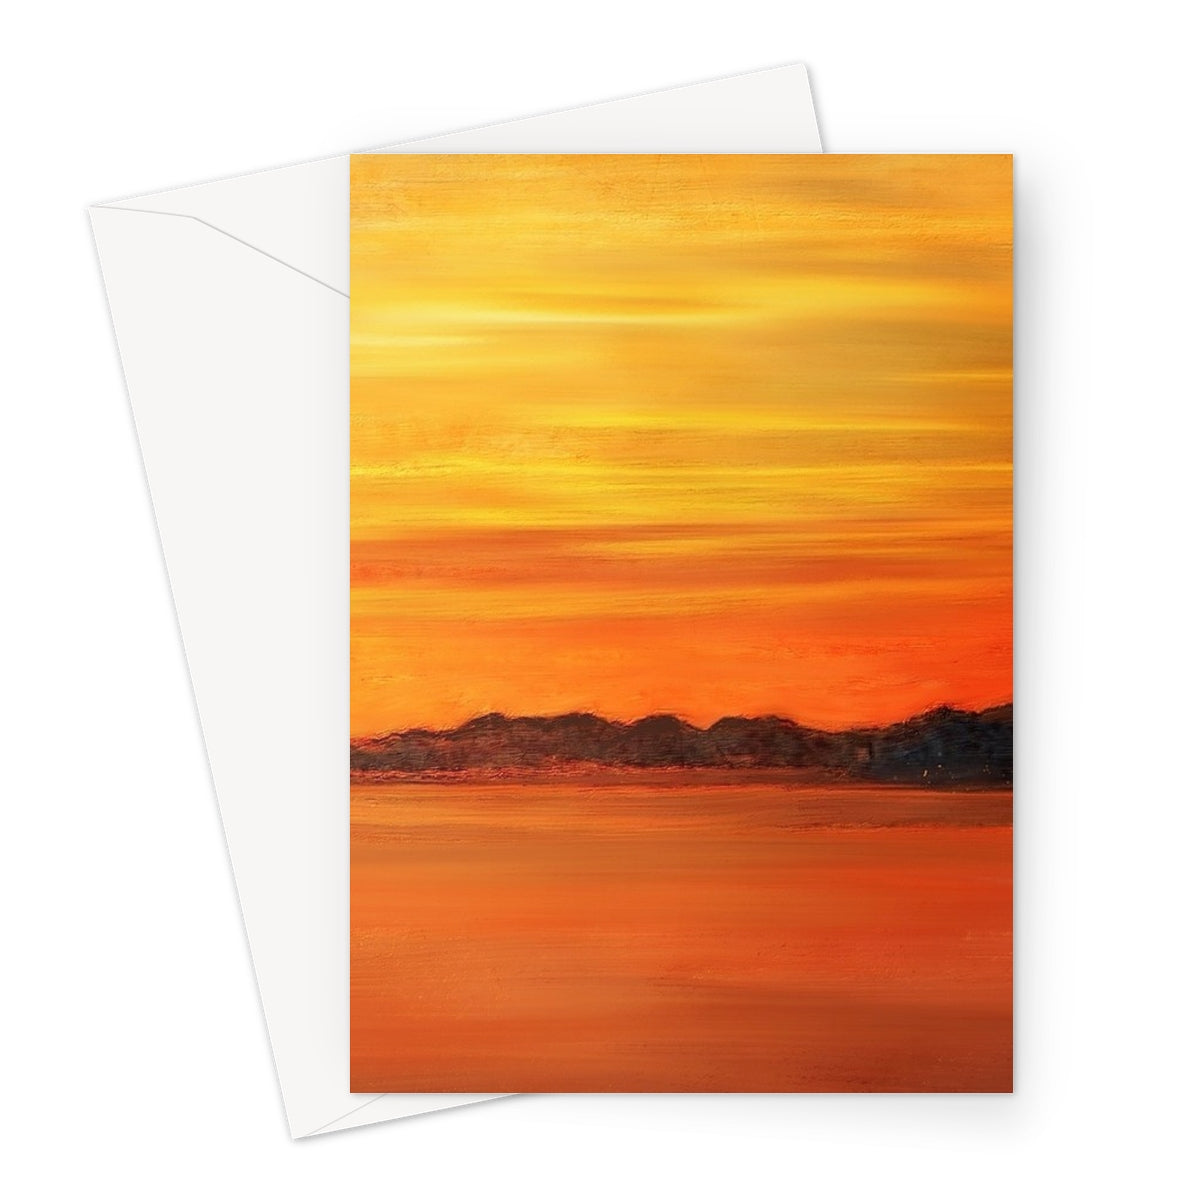 Loch Fyne Sunset Art Gifts Greeting Card-Stationery-Scottish Lochs & Mountains Art Gallery-A5 Portrait-1 Card-Paintings, Prints, Homeware, Art Gifts From Scotland By Scottish Artist Kevin Hunter